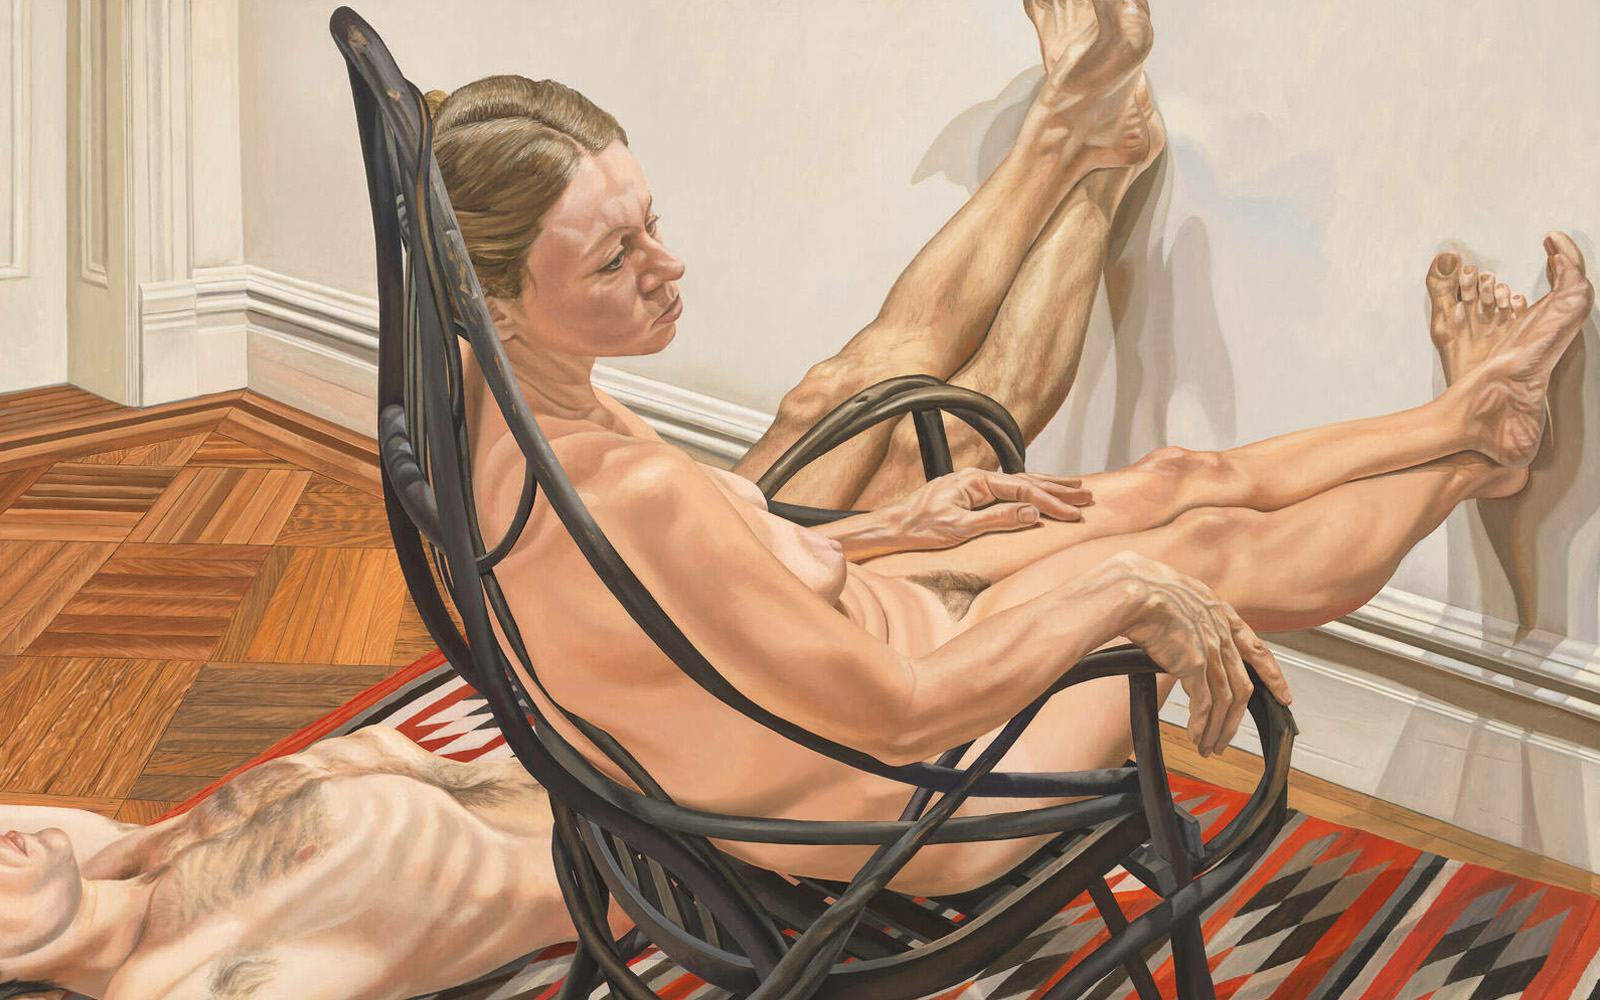 Pearlstein nude painting of a woman in an adirondack chair and a man laying on a nearby rug.